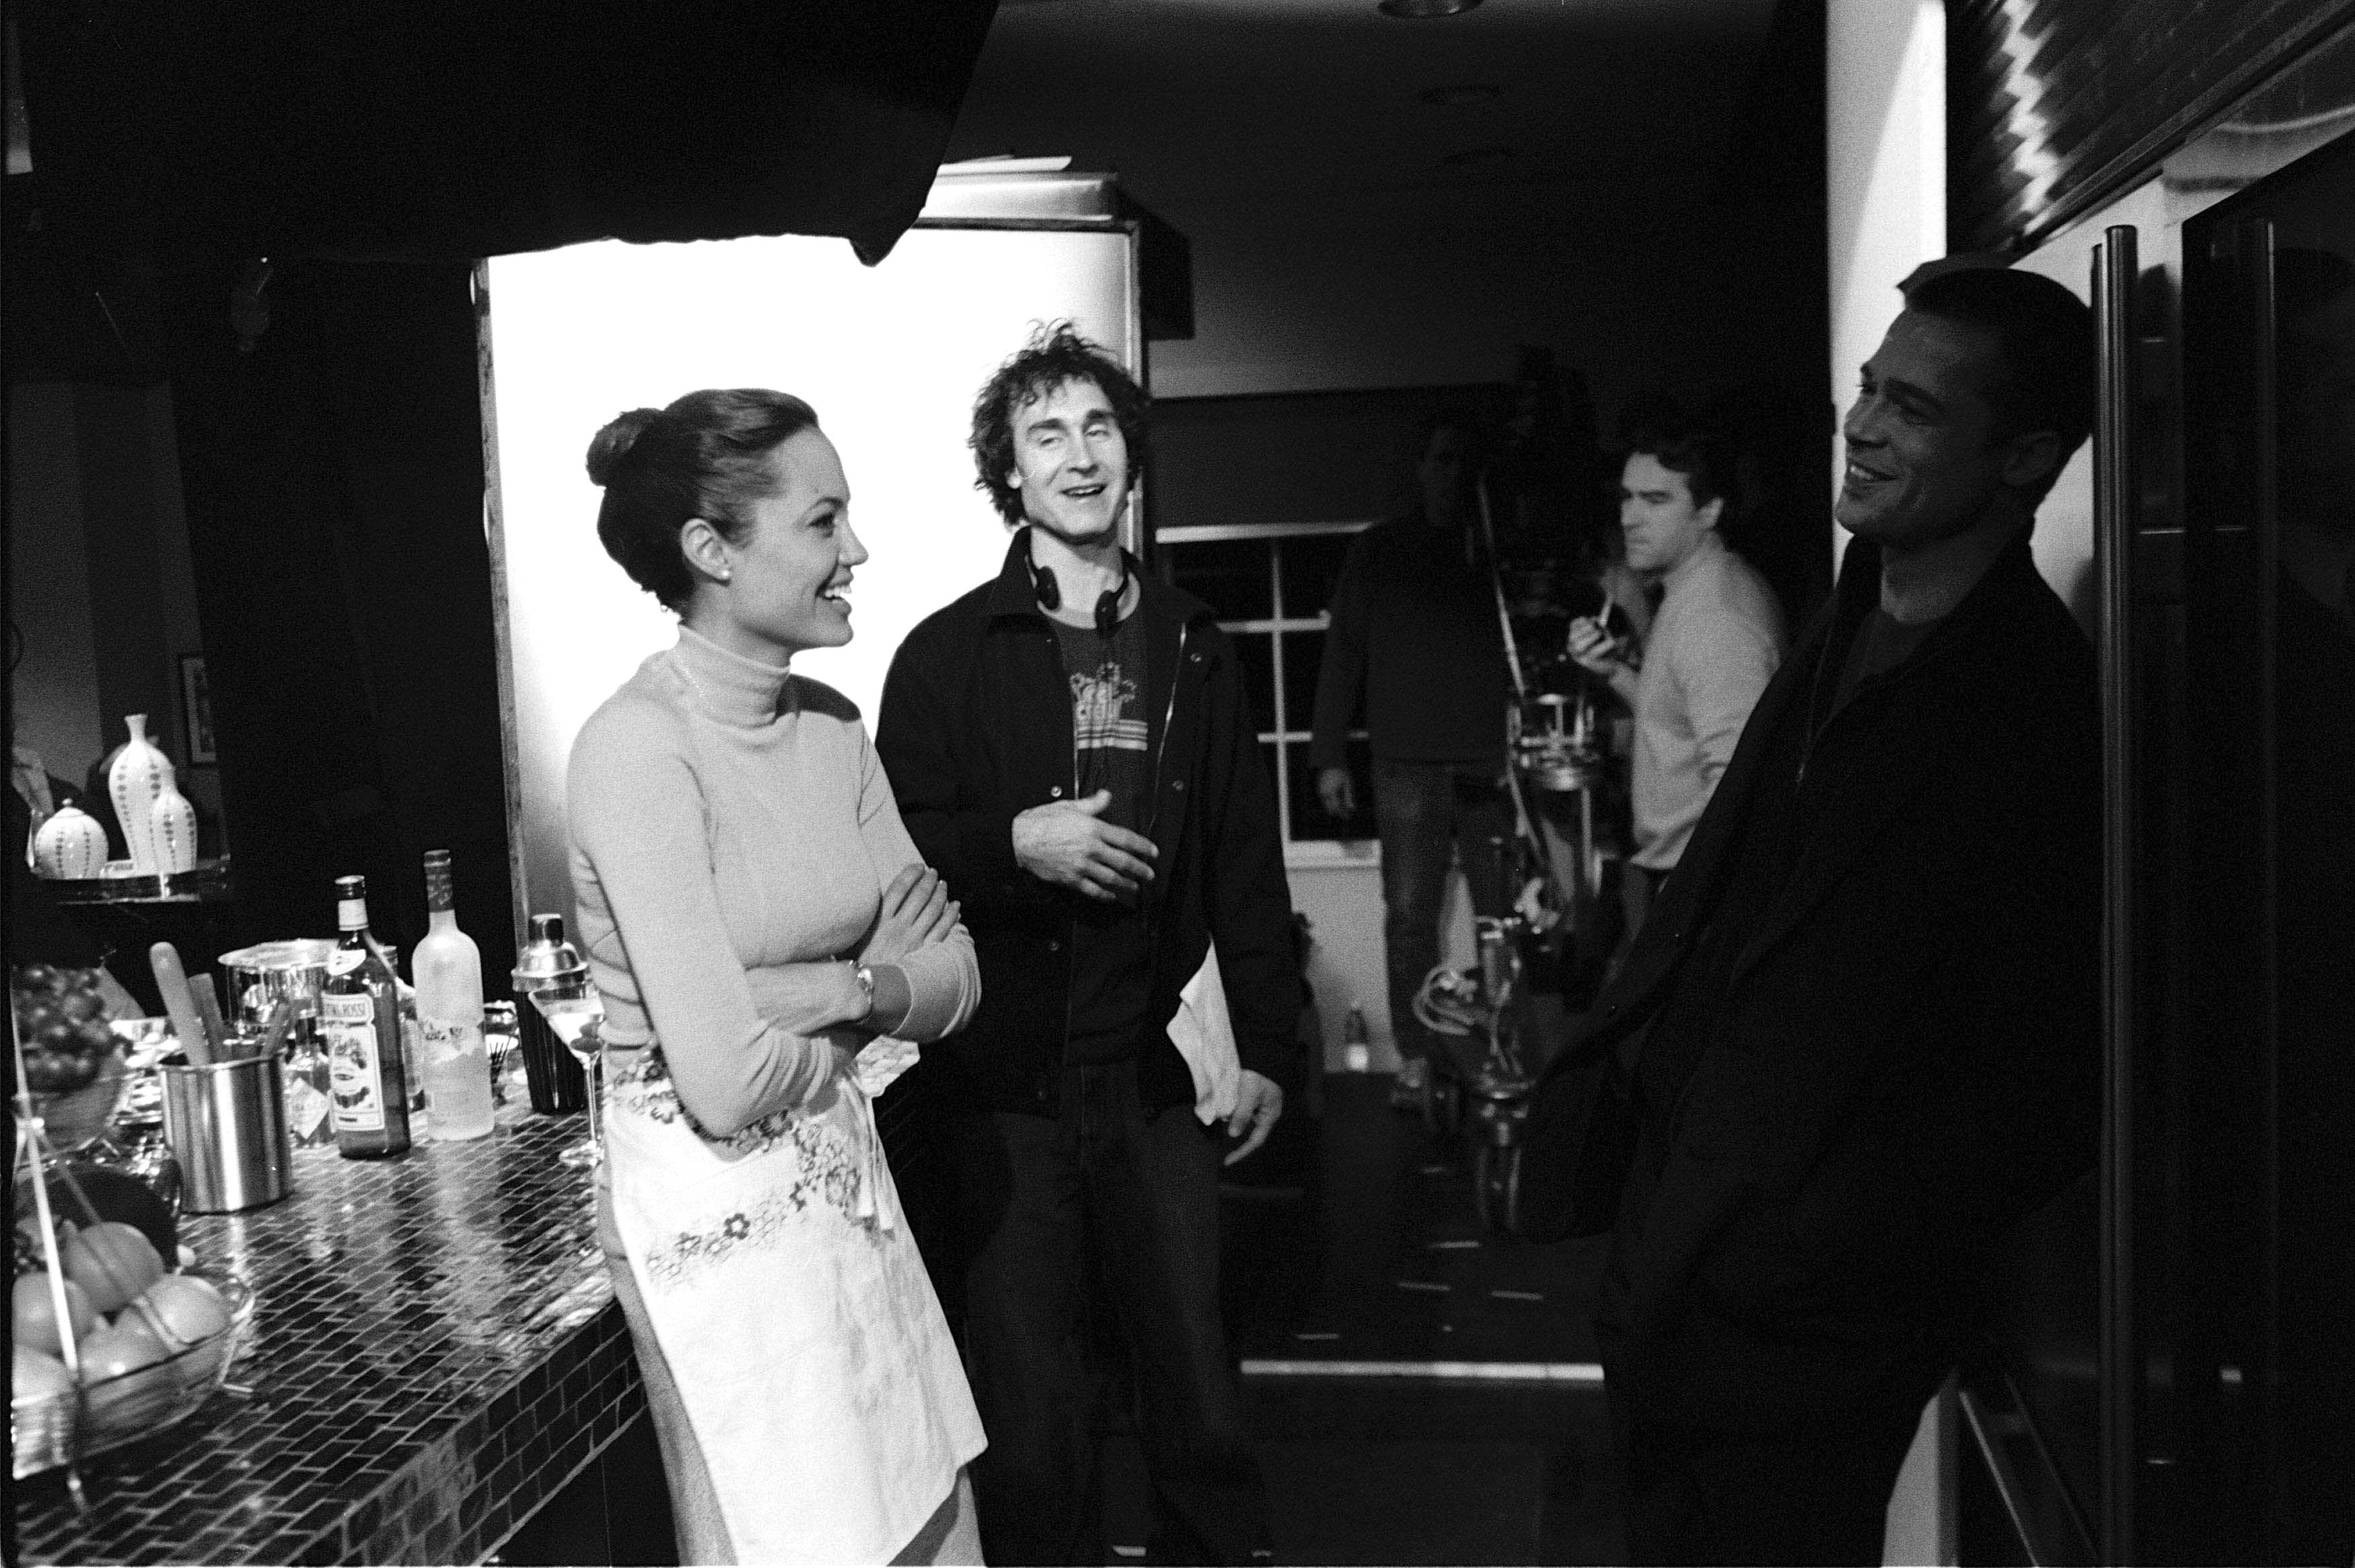 Director Doug Limon has a laugh with Angelina Jolie and Brad Pitt prior to a scene for Mr. and Mrs. Smith in 2005.